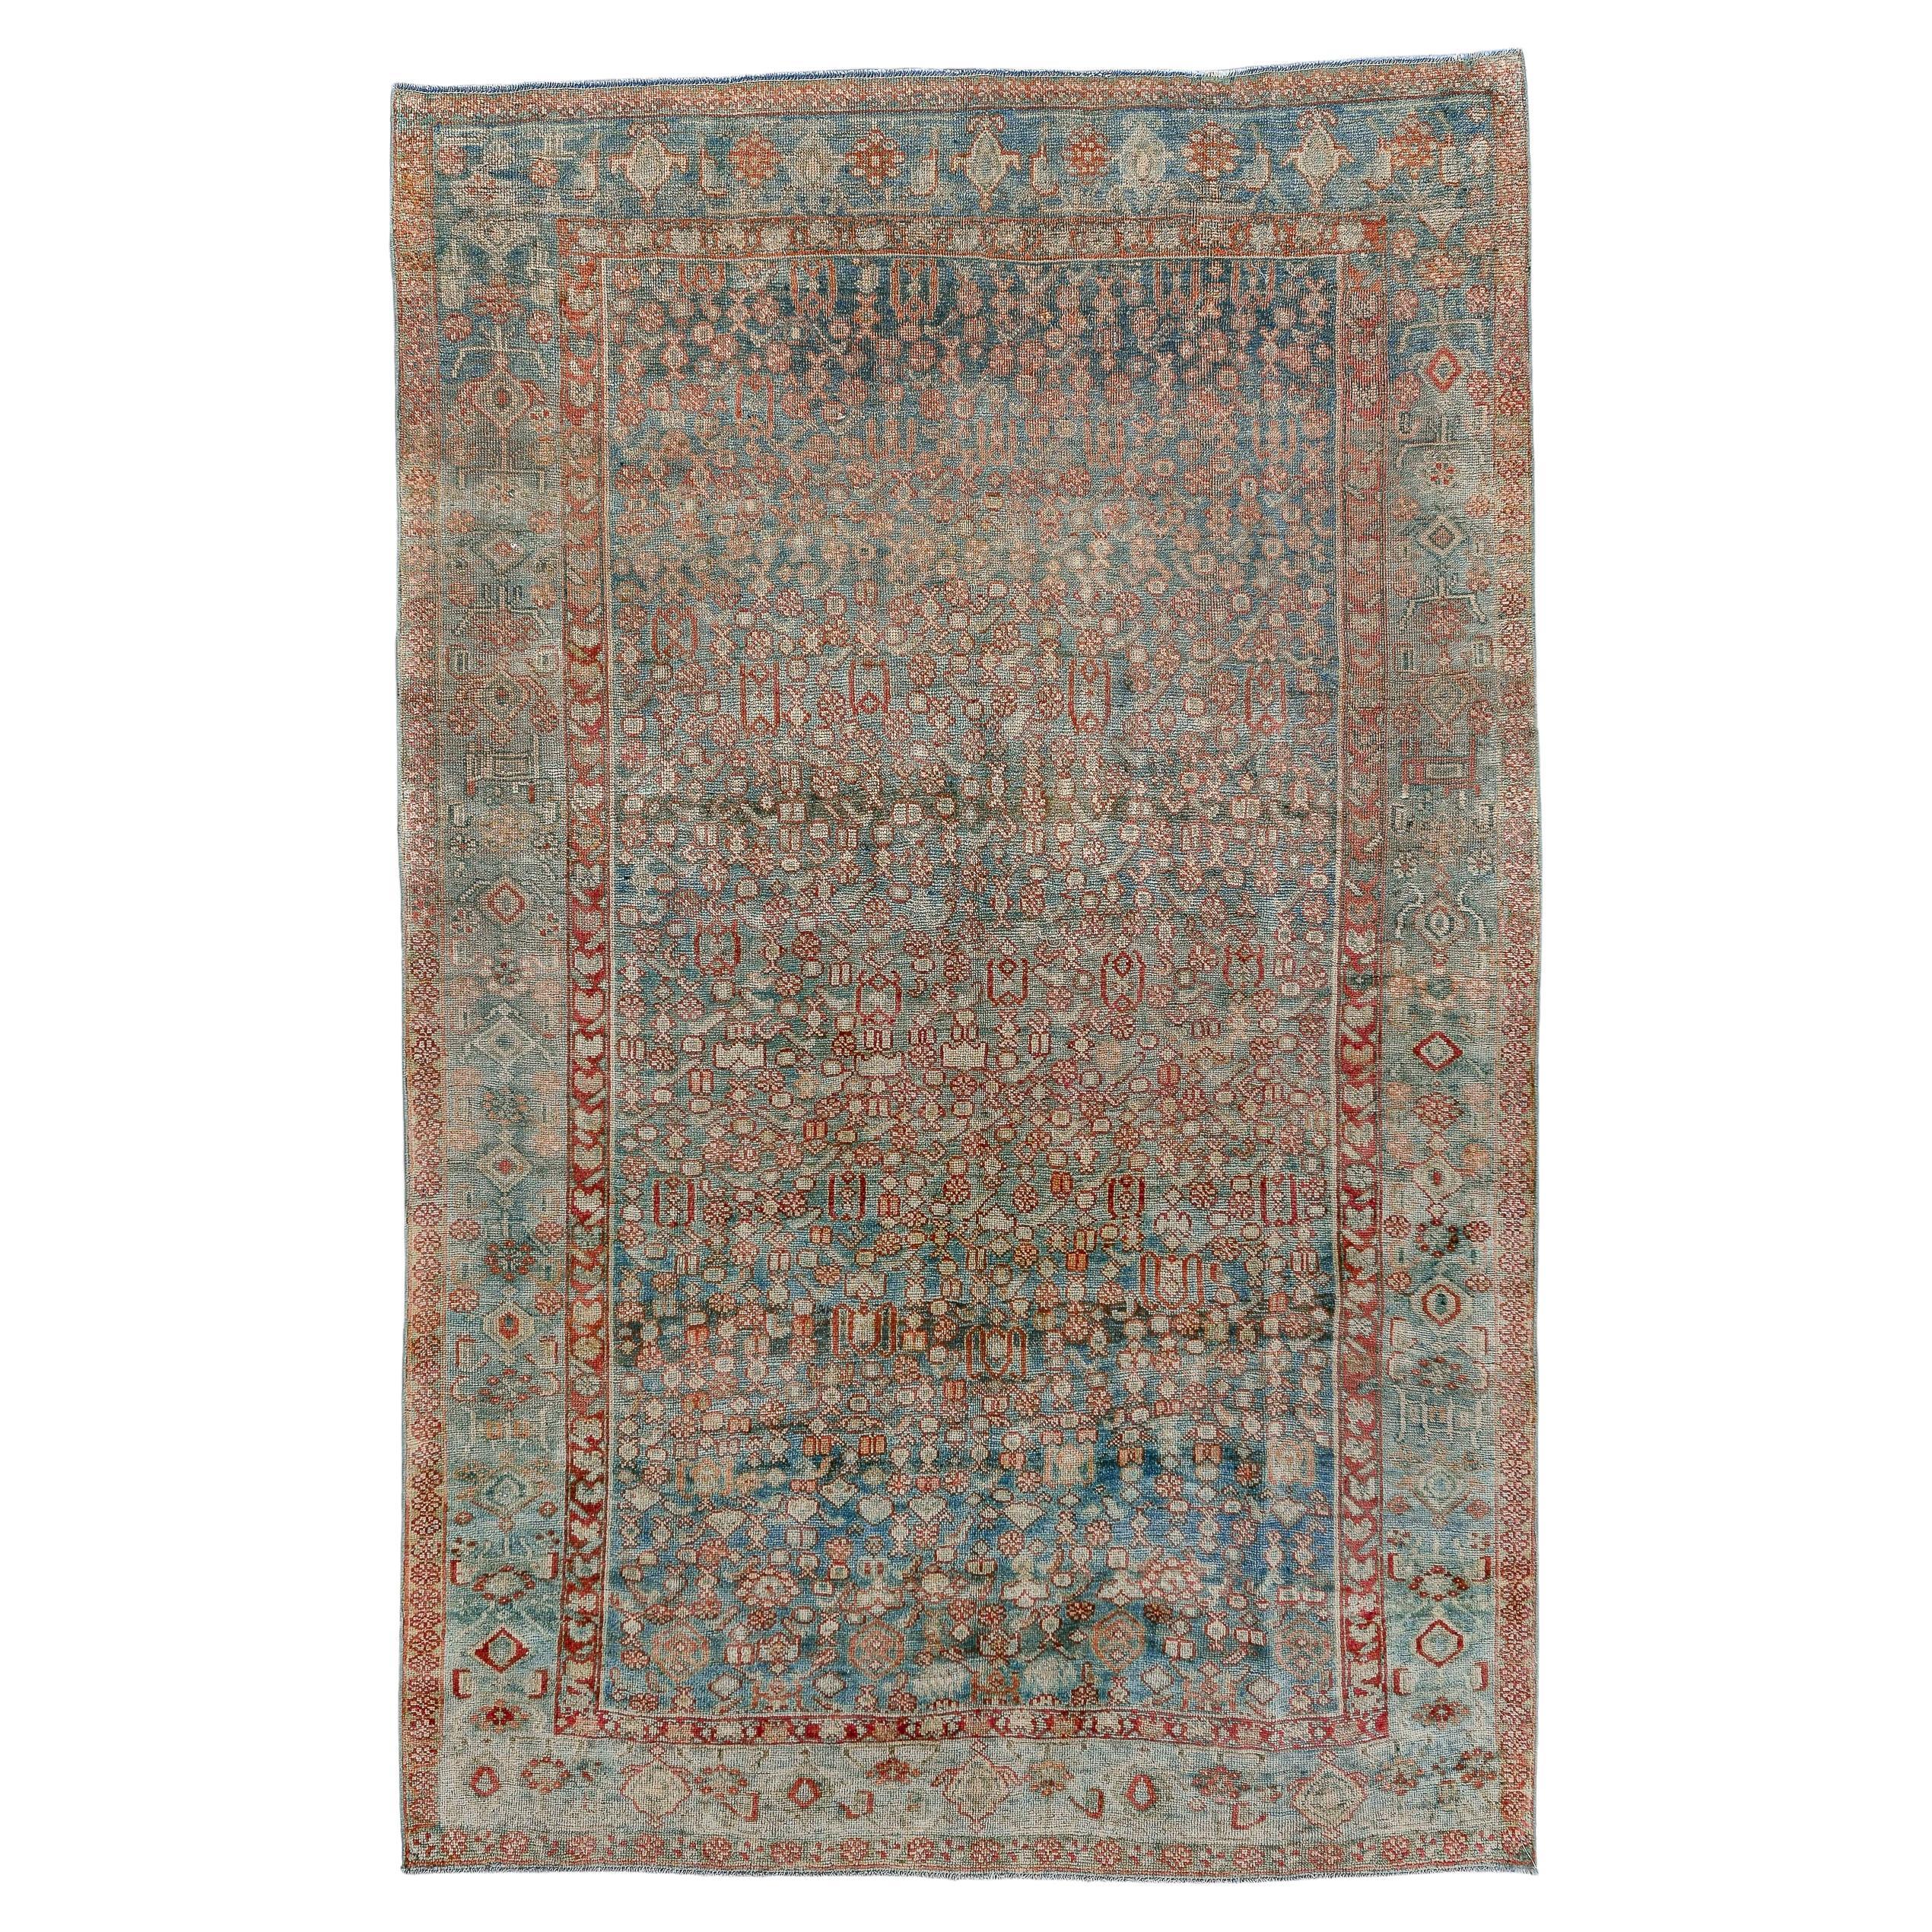 Antique Bidjar Rug Coral Reds Paired With Soothing Blues - Herati Pattern For Sale